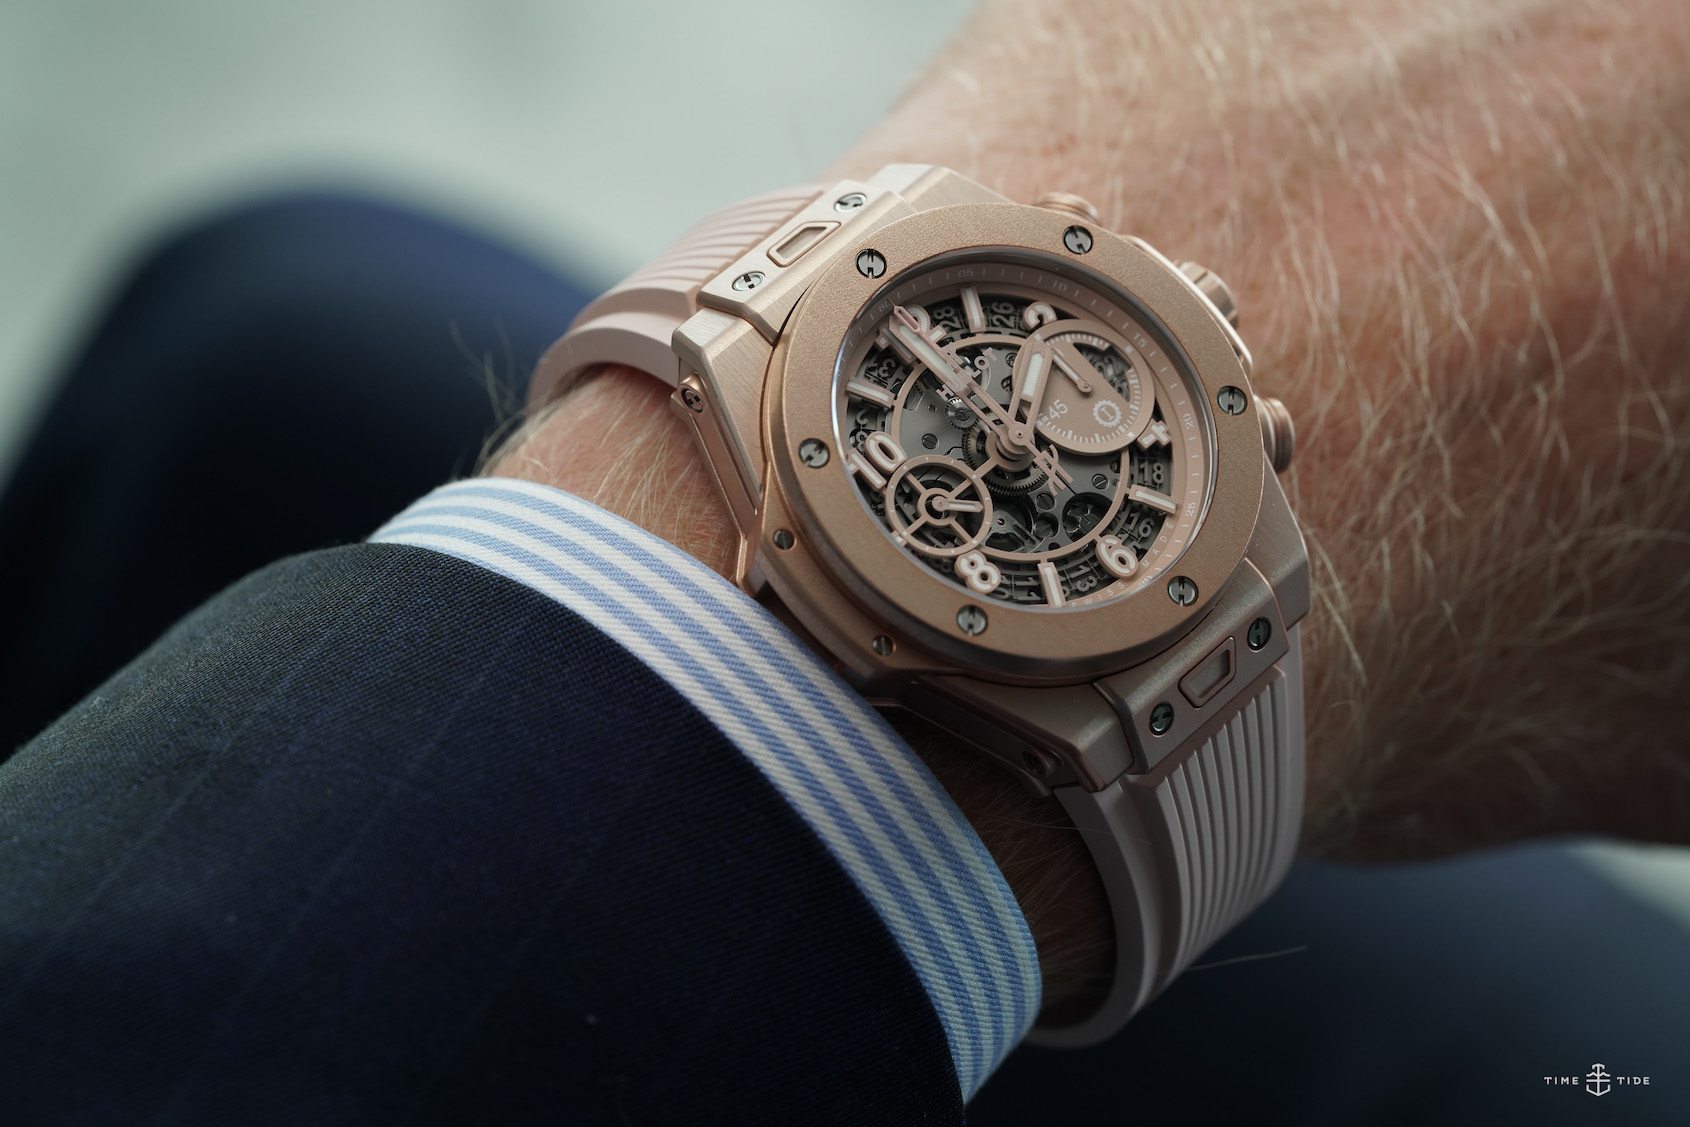 The Hublot Big Bang Millennial Pink in this video sure is pretty, but ...